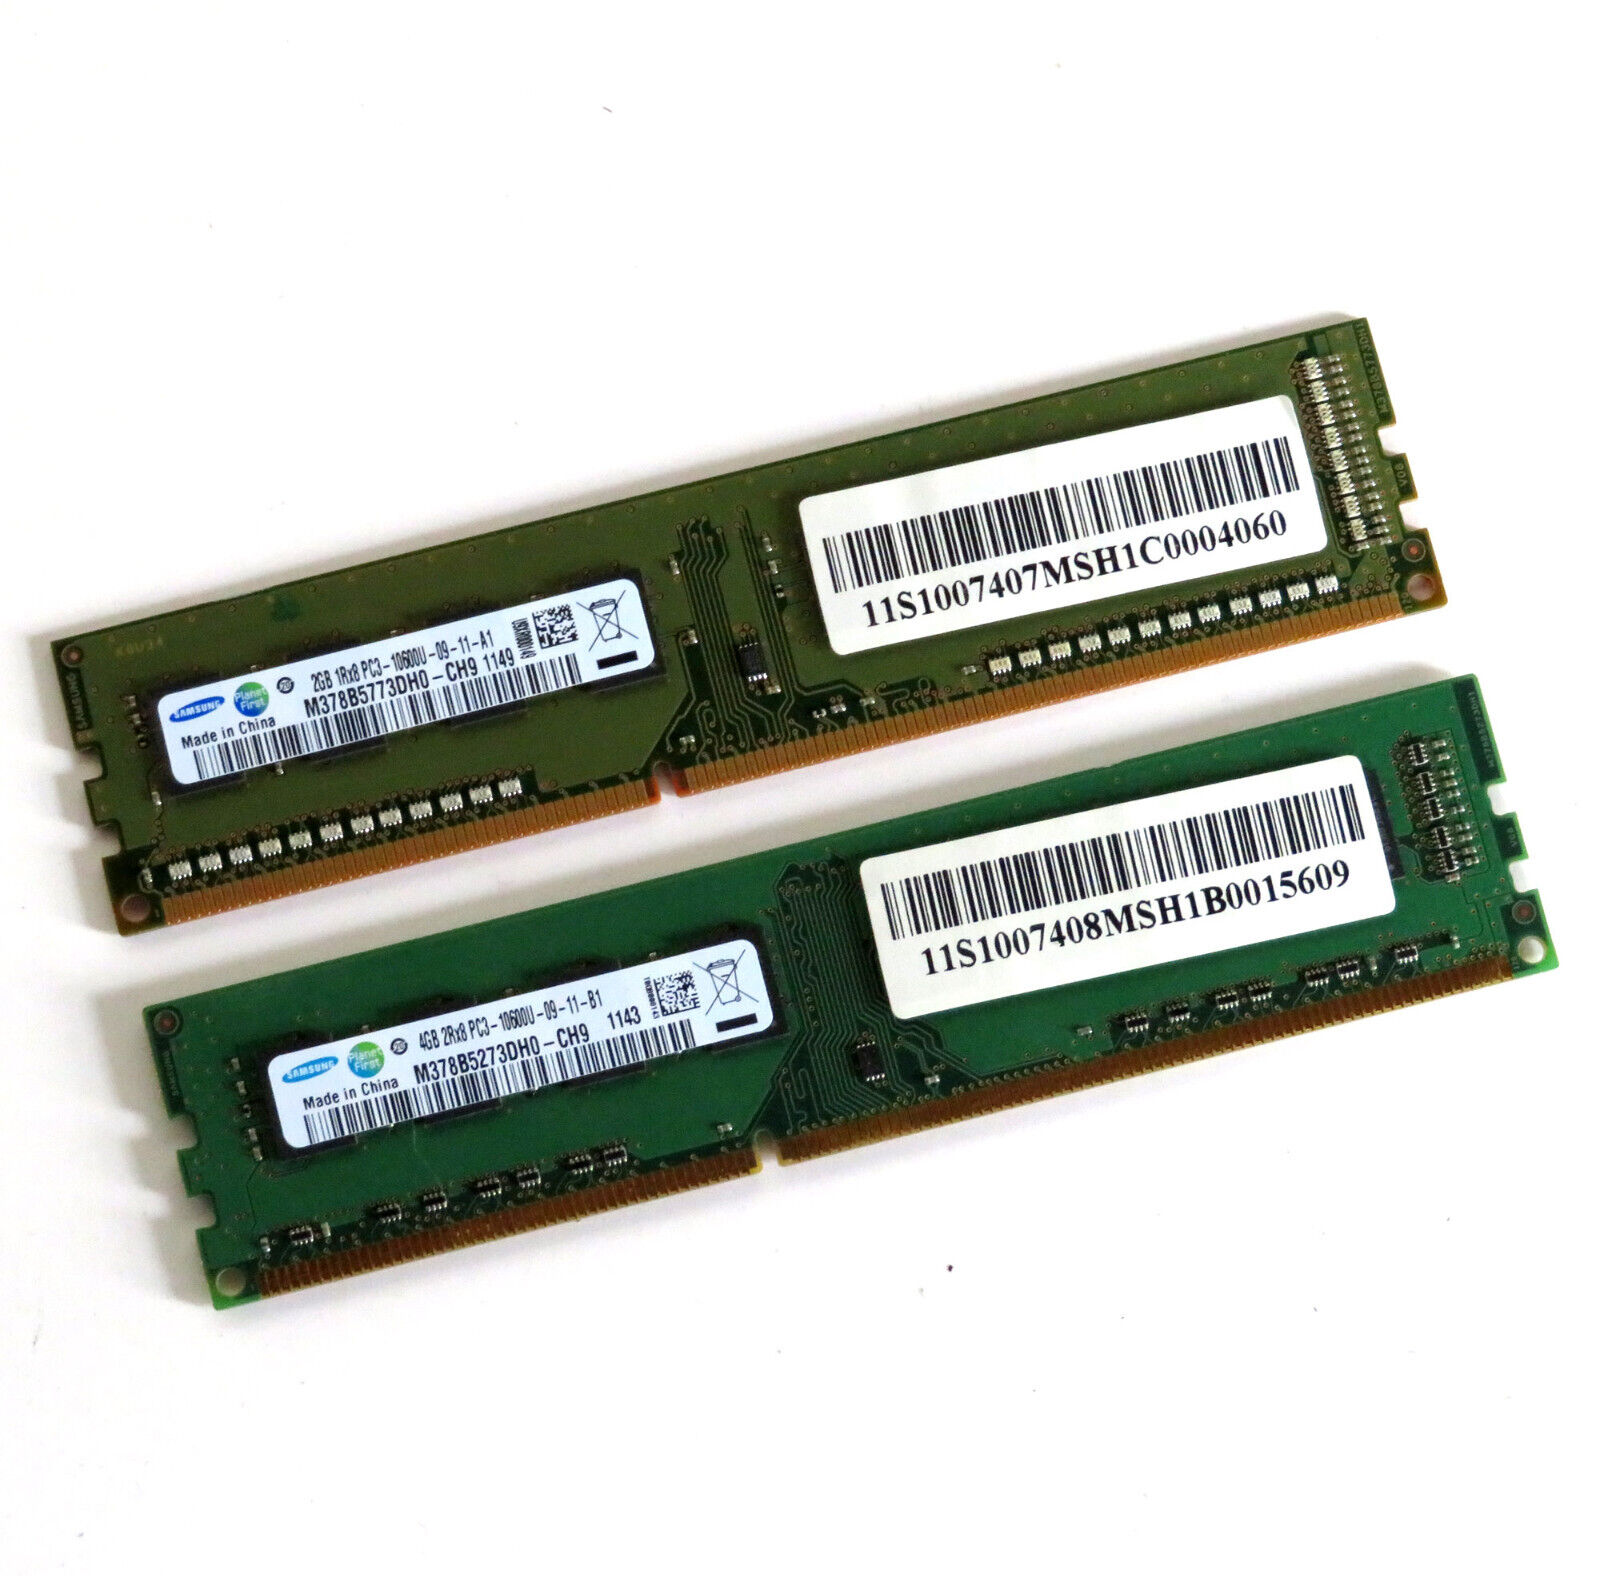 6GB (4GB + 2GB) PC3-10600 Samsung DDR3-1333 RAM Memory Kit TESTED EXCELLENT COND